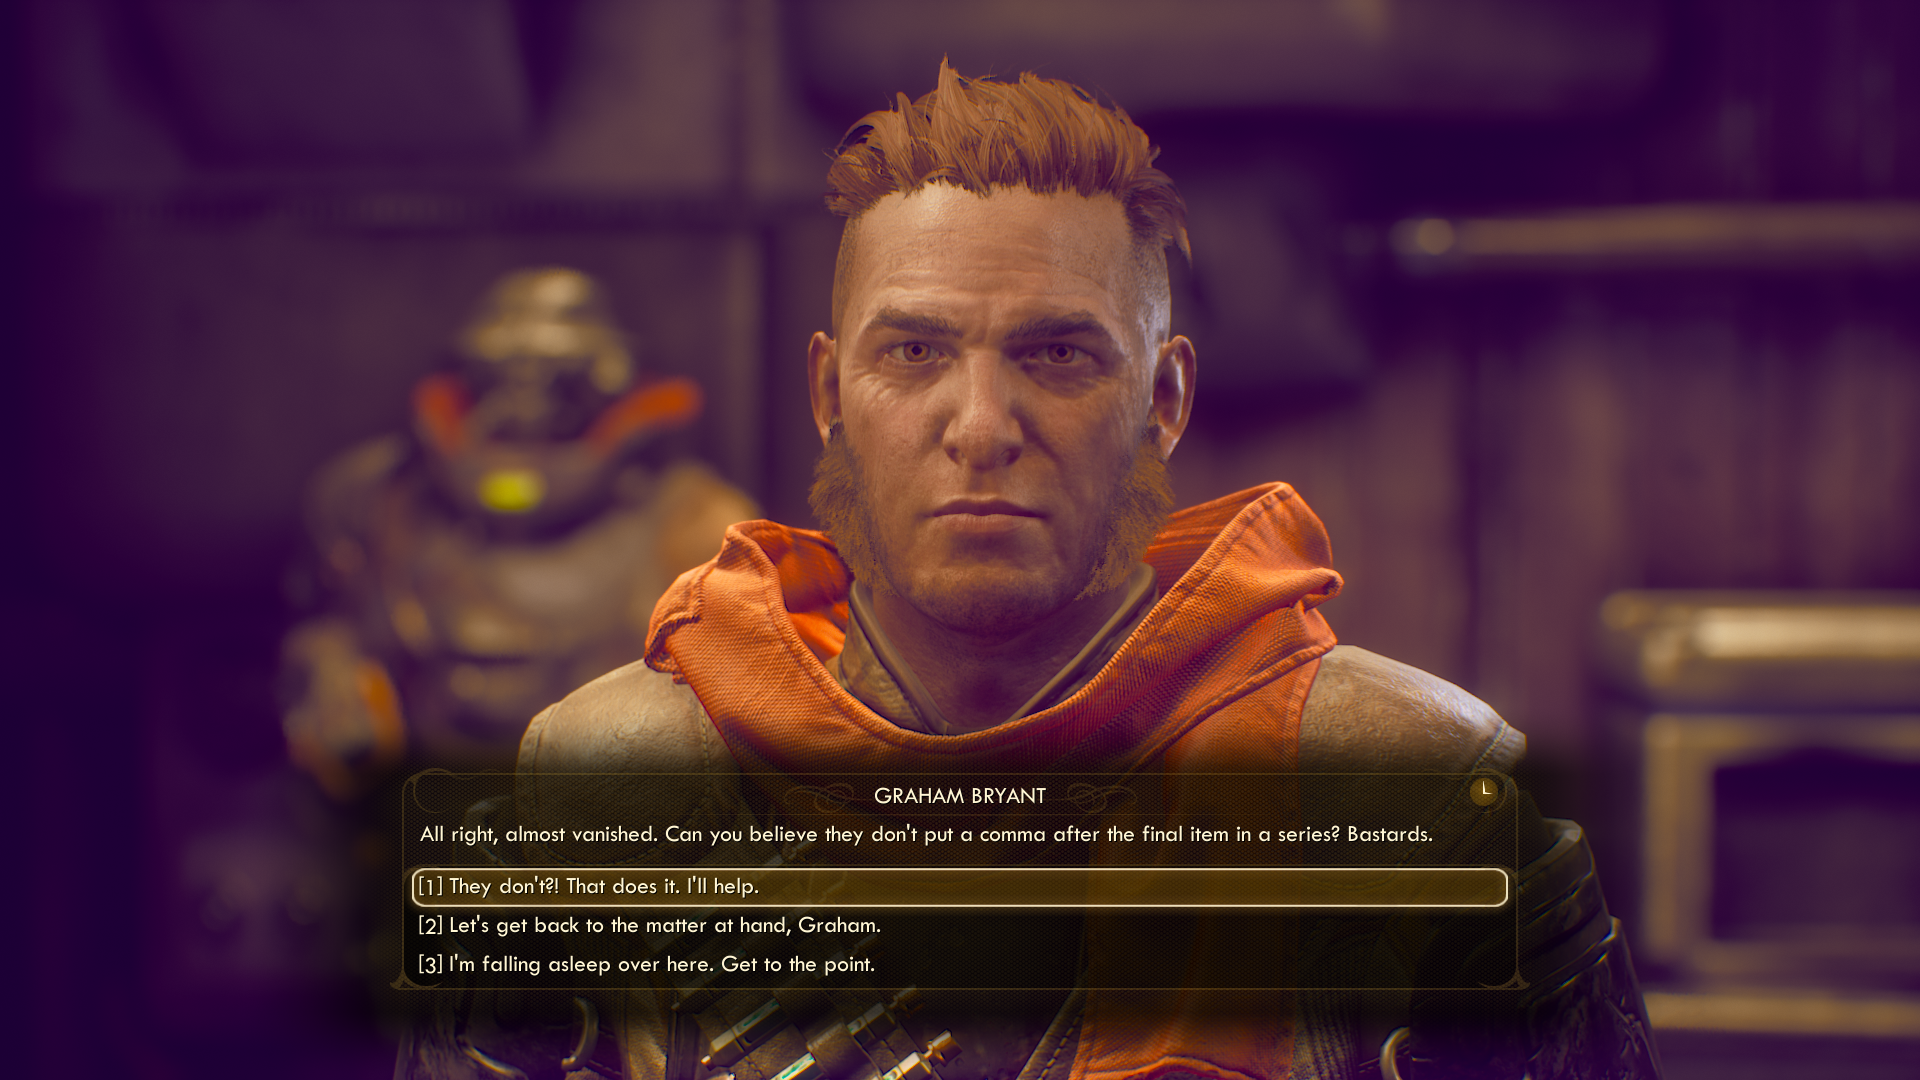 The Outer Worlds Review - Roller Coaster of Emotions and Travel